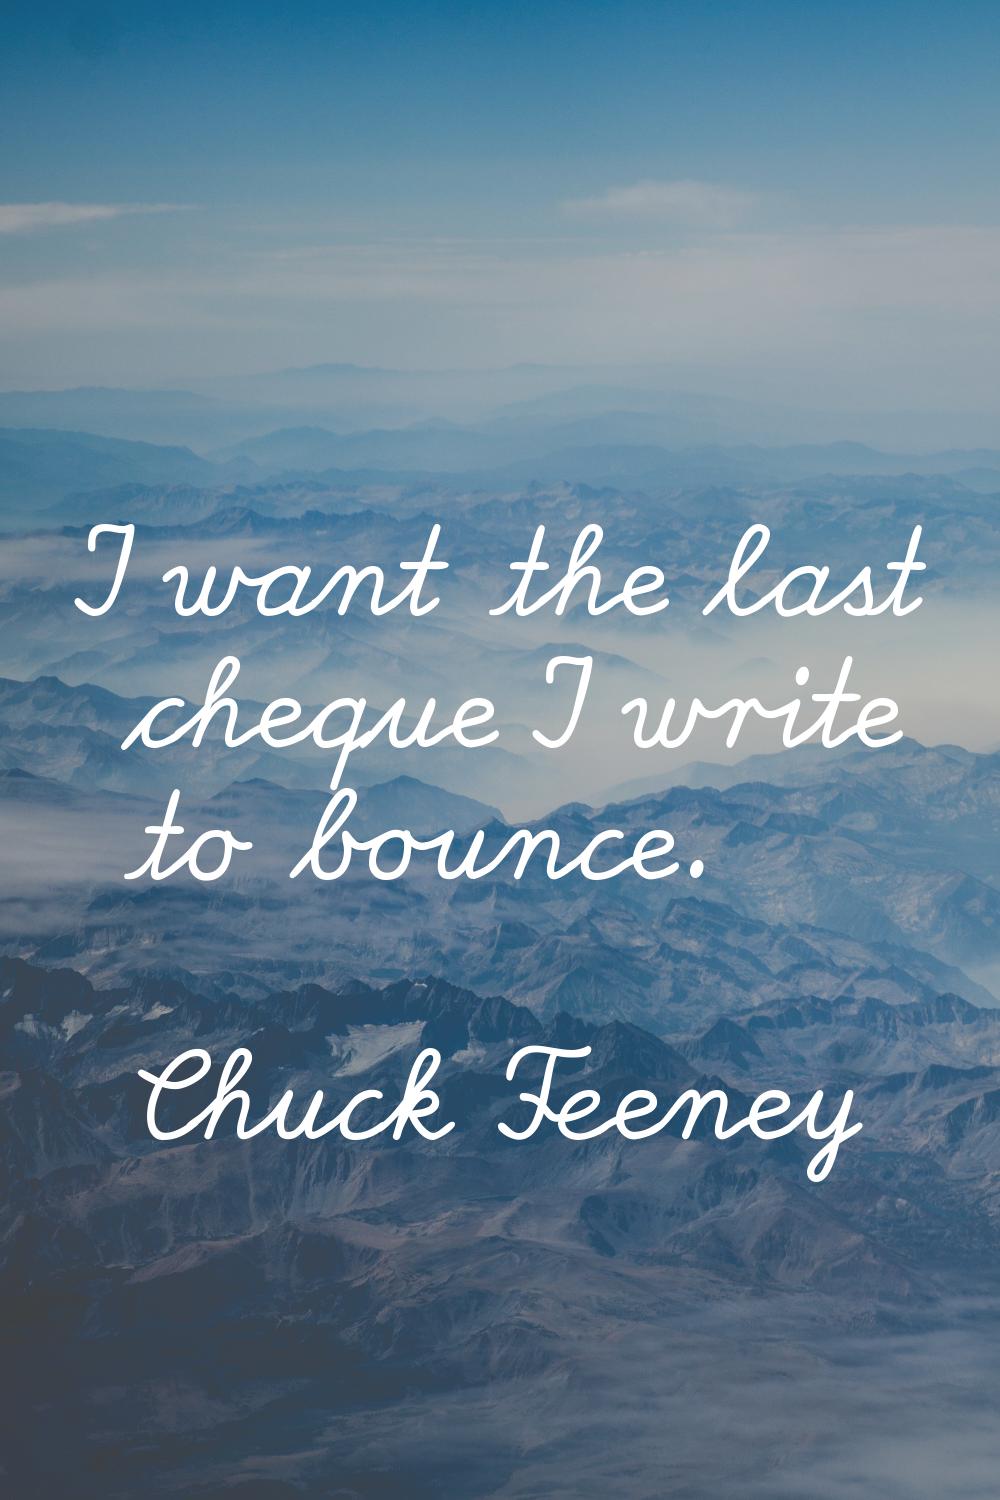 I want the last cheque I write to bounce.